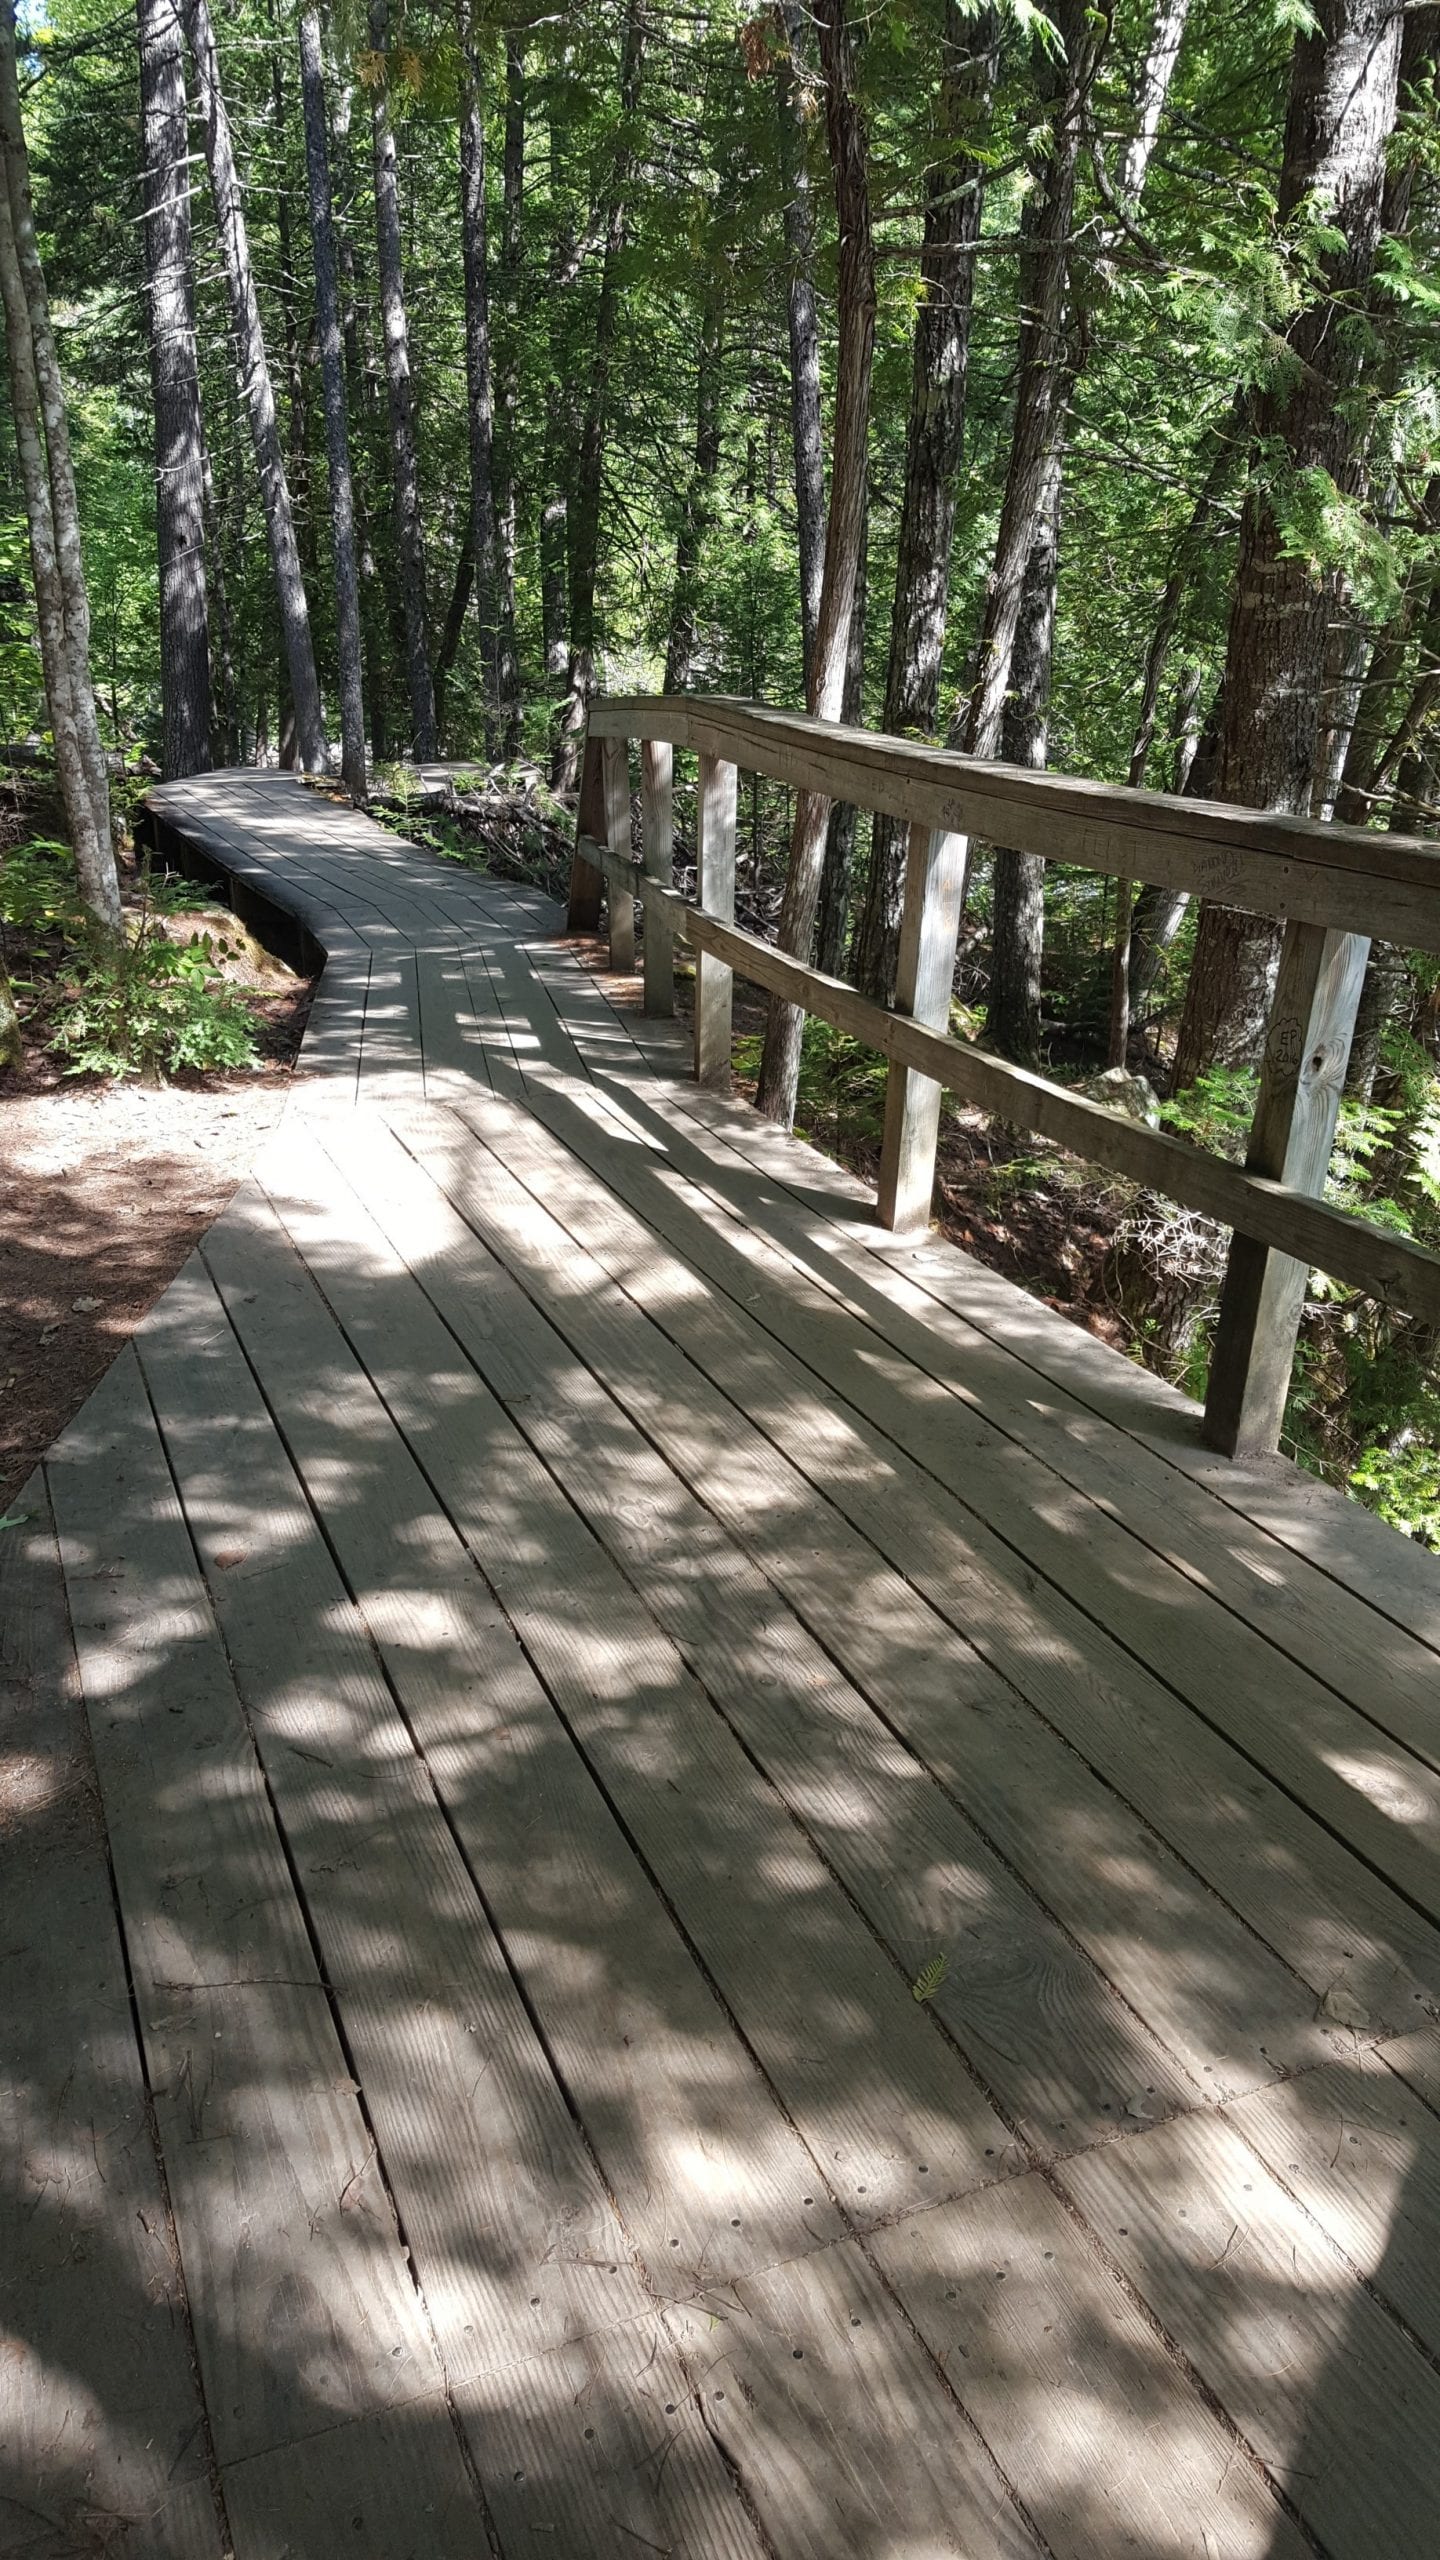 A lot of time and effort was put into building these beautiful boardwalks.